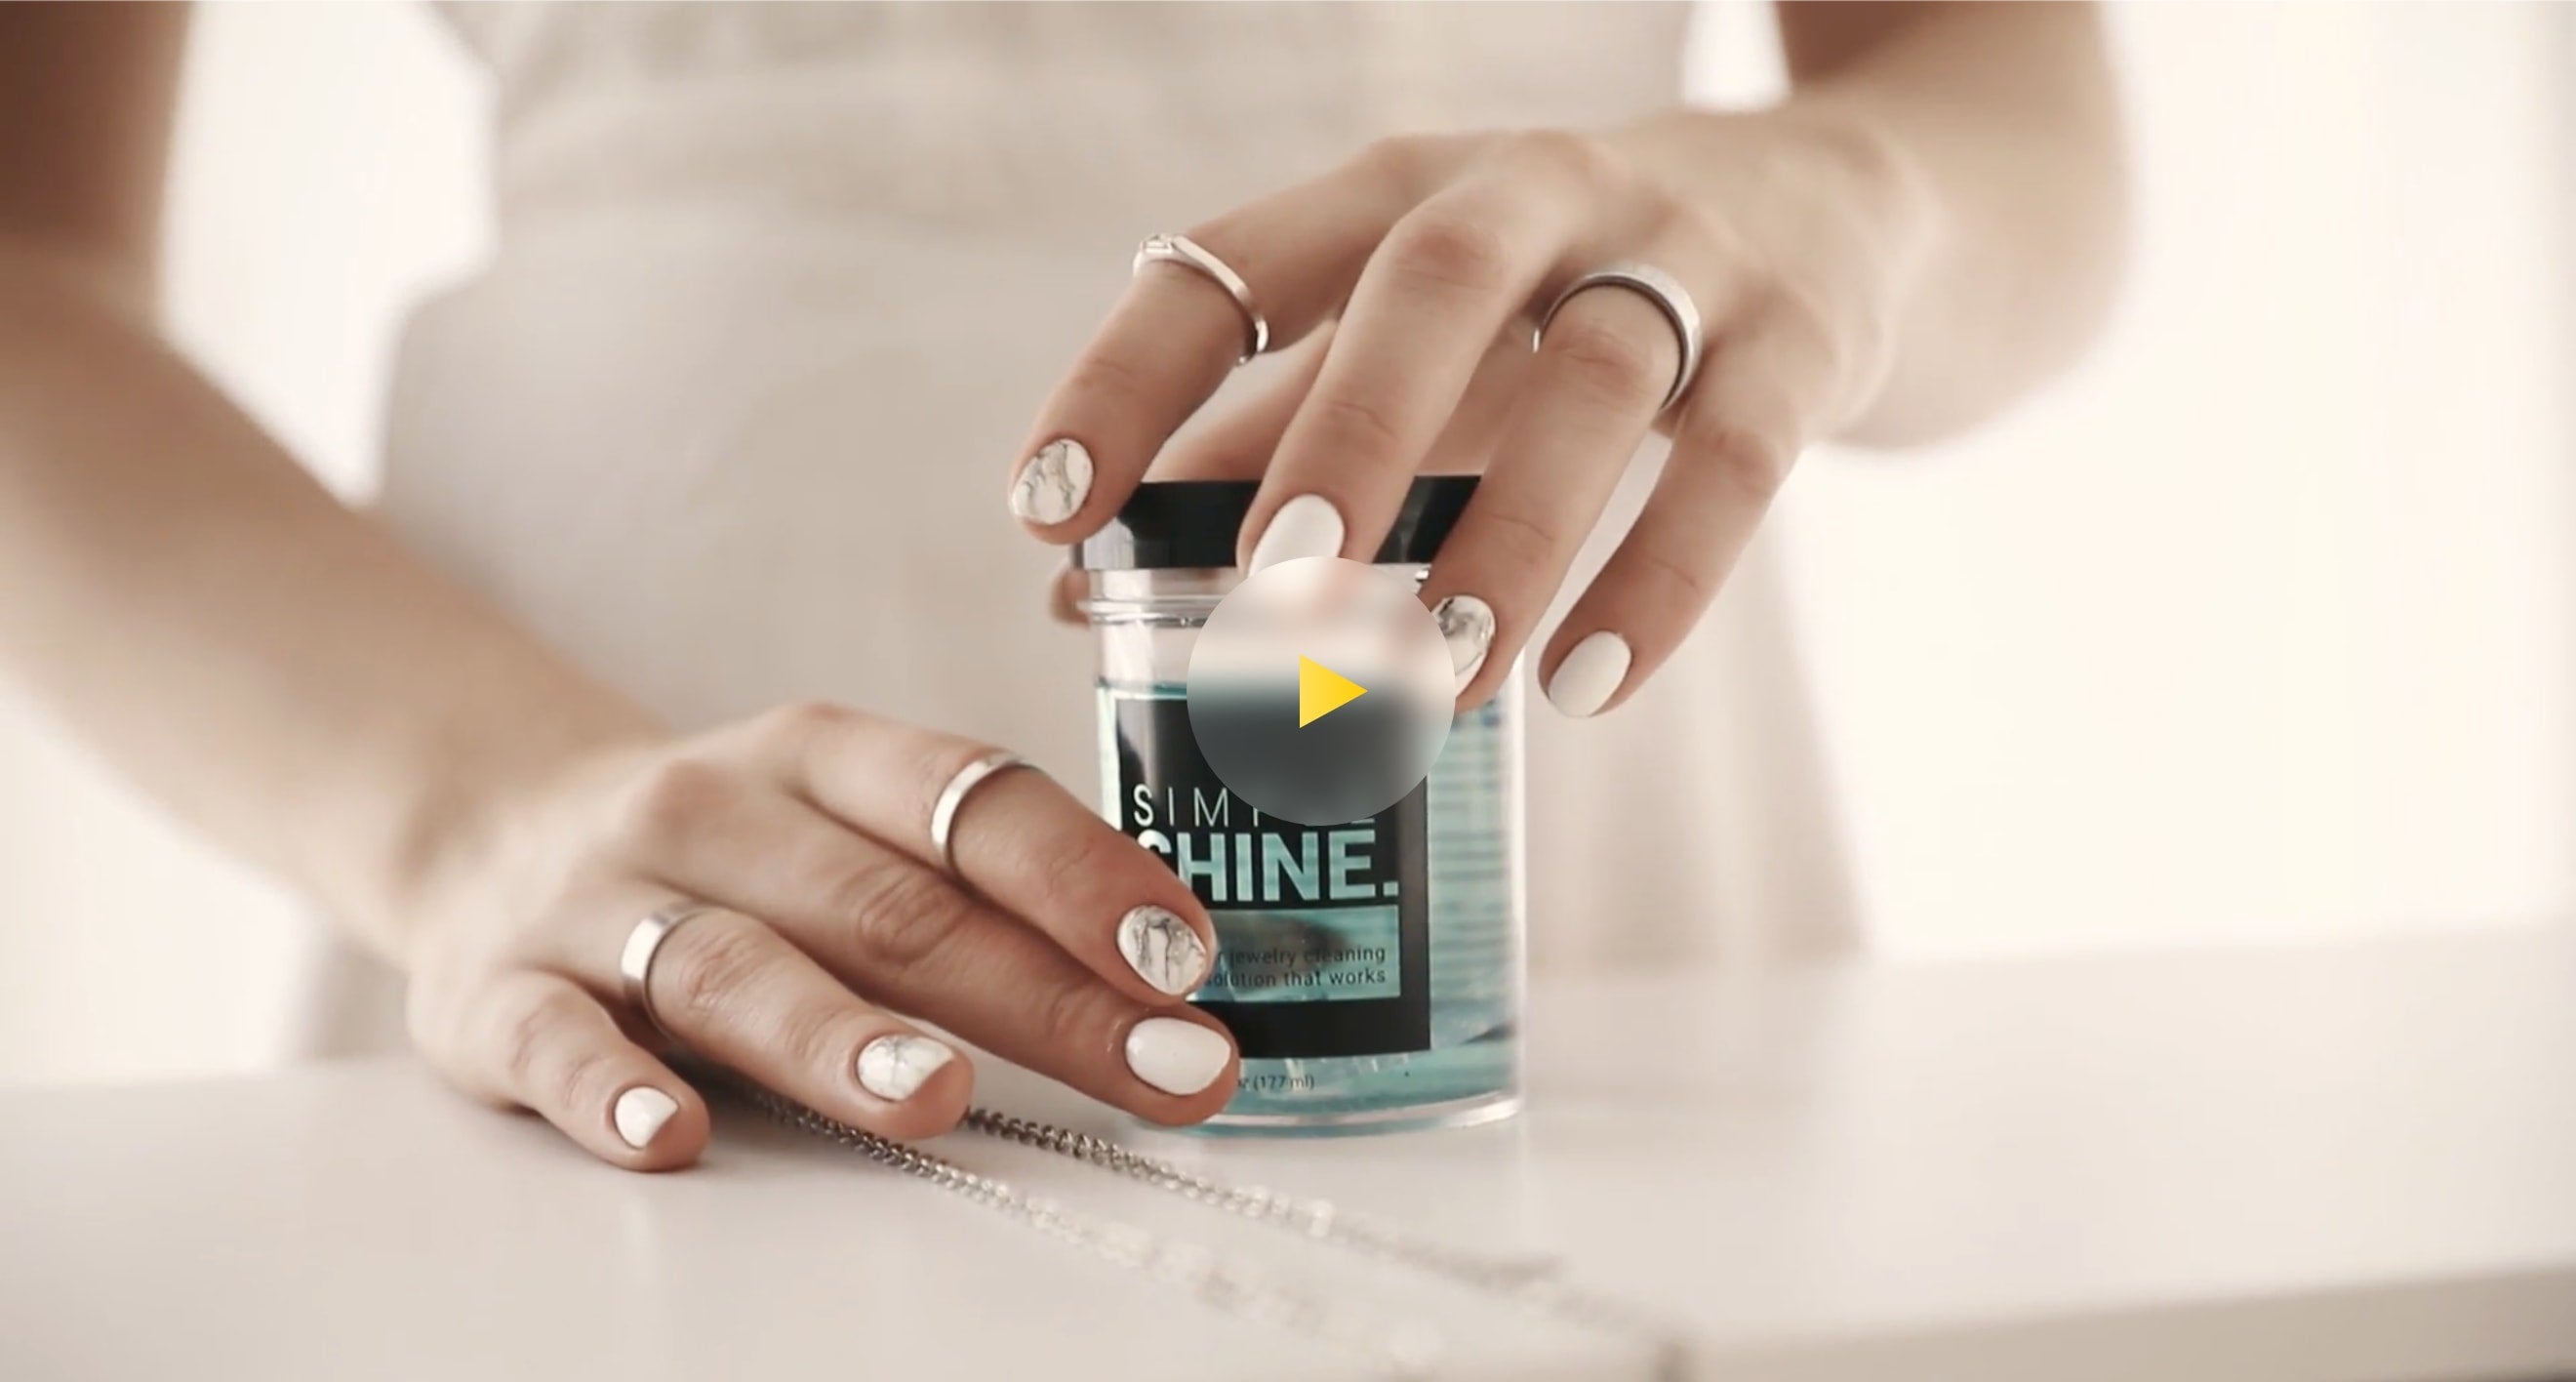 Simple Shine®  Jewelry and Shoe Care Products that Simply Work